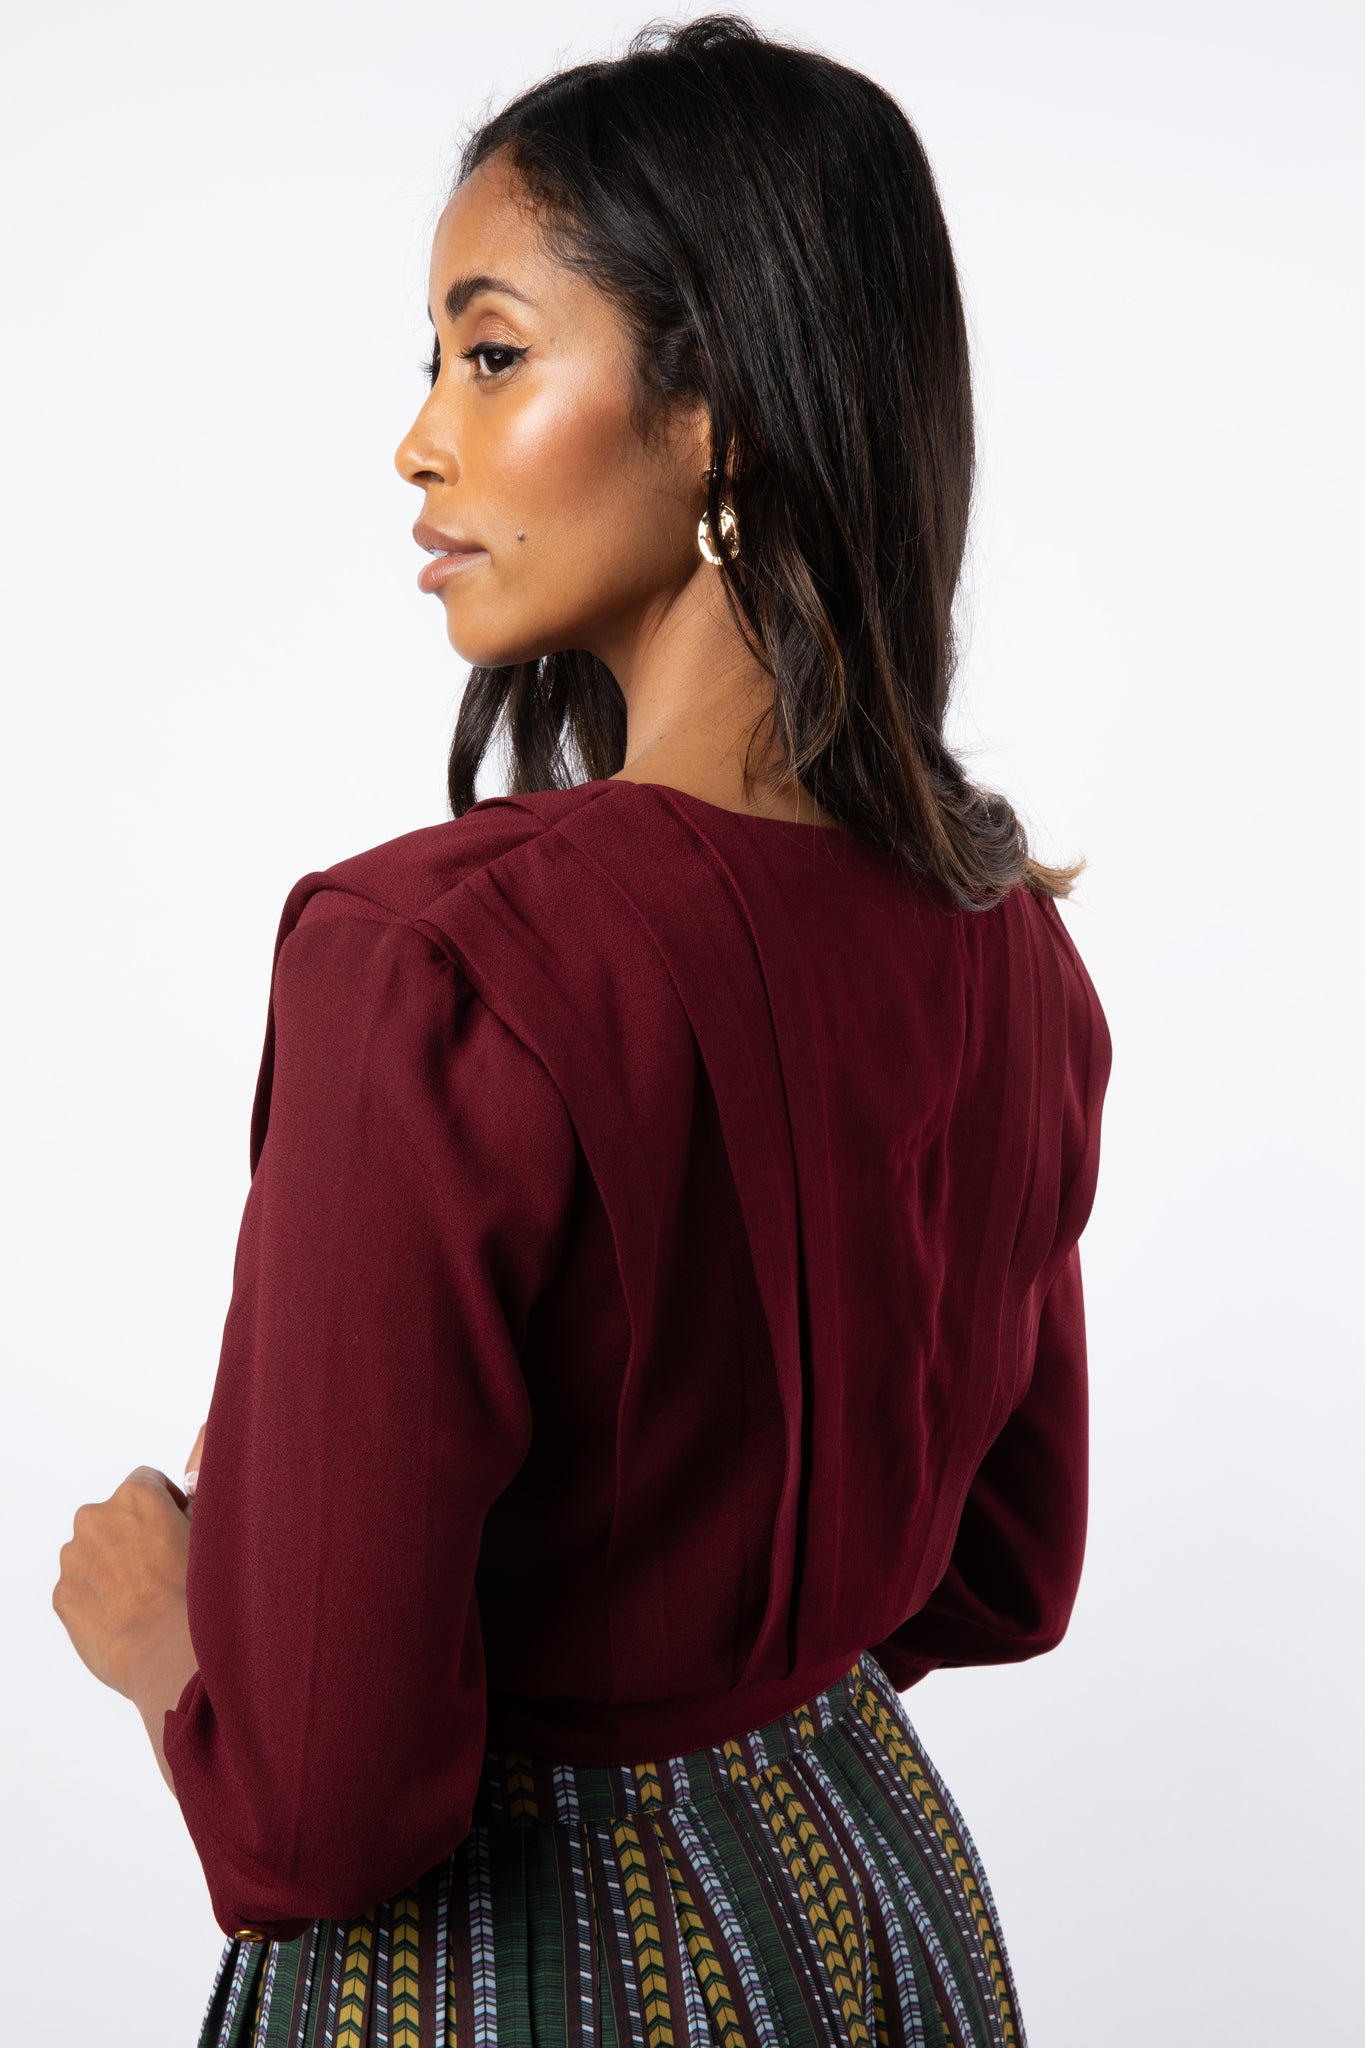 Back view close up of pleated maroon shirt details